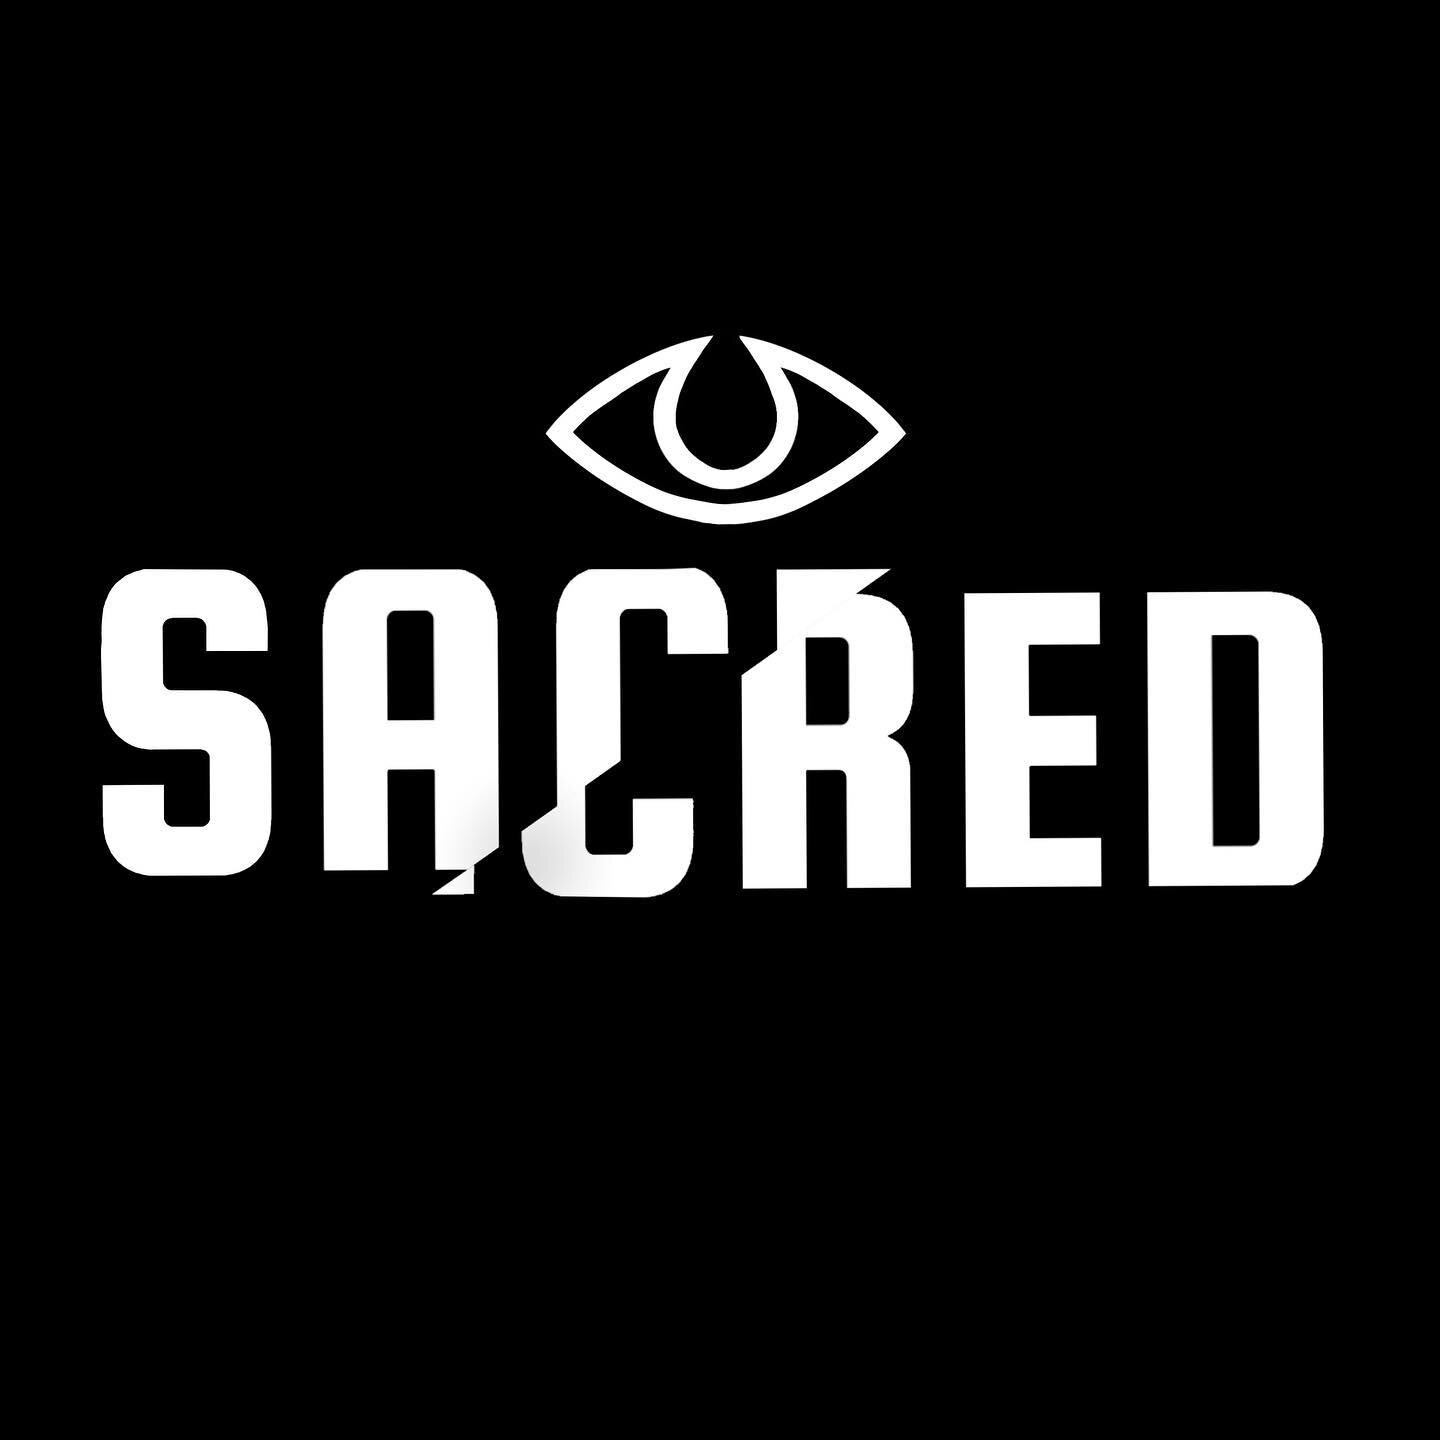 I started @sacred.skateboards with a good friend of mine, and I&rsquo;m excited to announce that its almost ready to launch! 😀 

We&rsquo;re making high quality skateboards with art from some of my favorite artists around the World. These boards wil